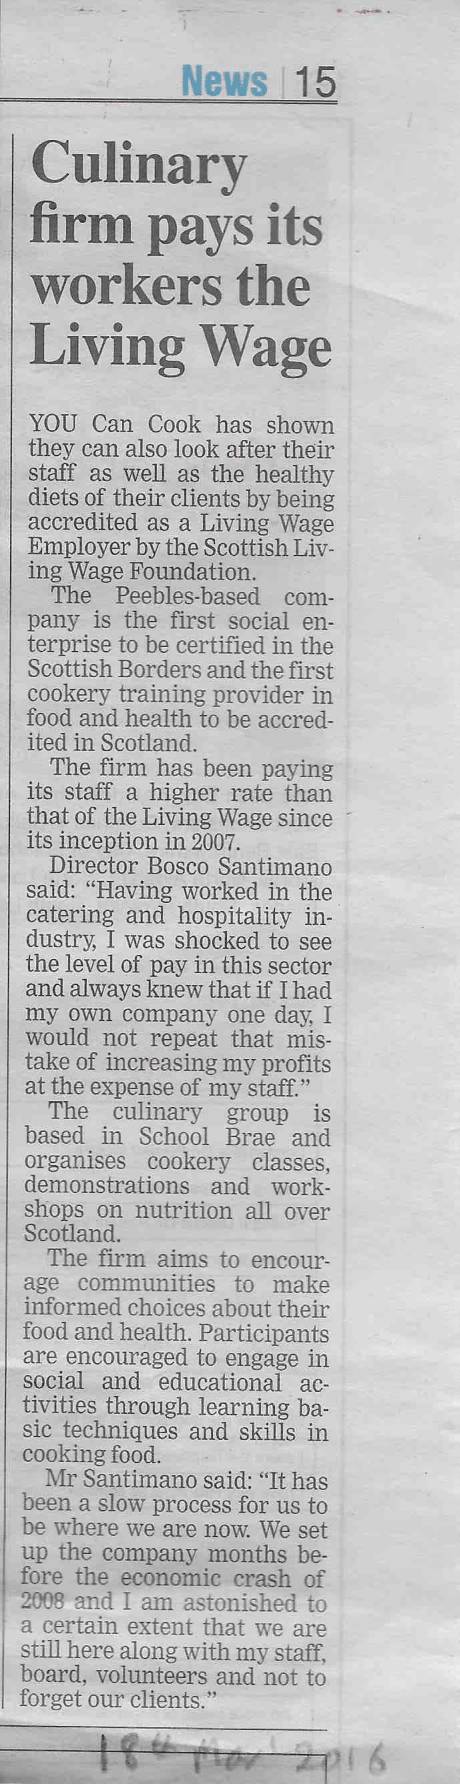 Press Clipping: Culinary firm pays its workers the Living Wage